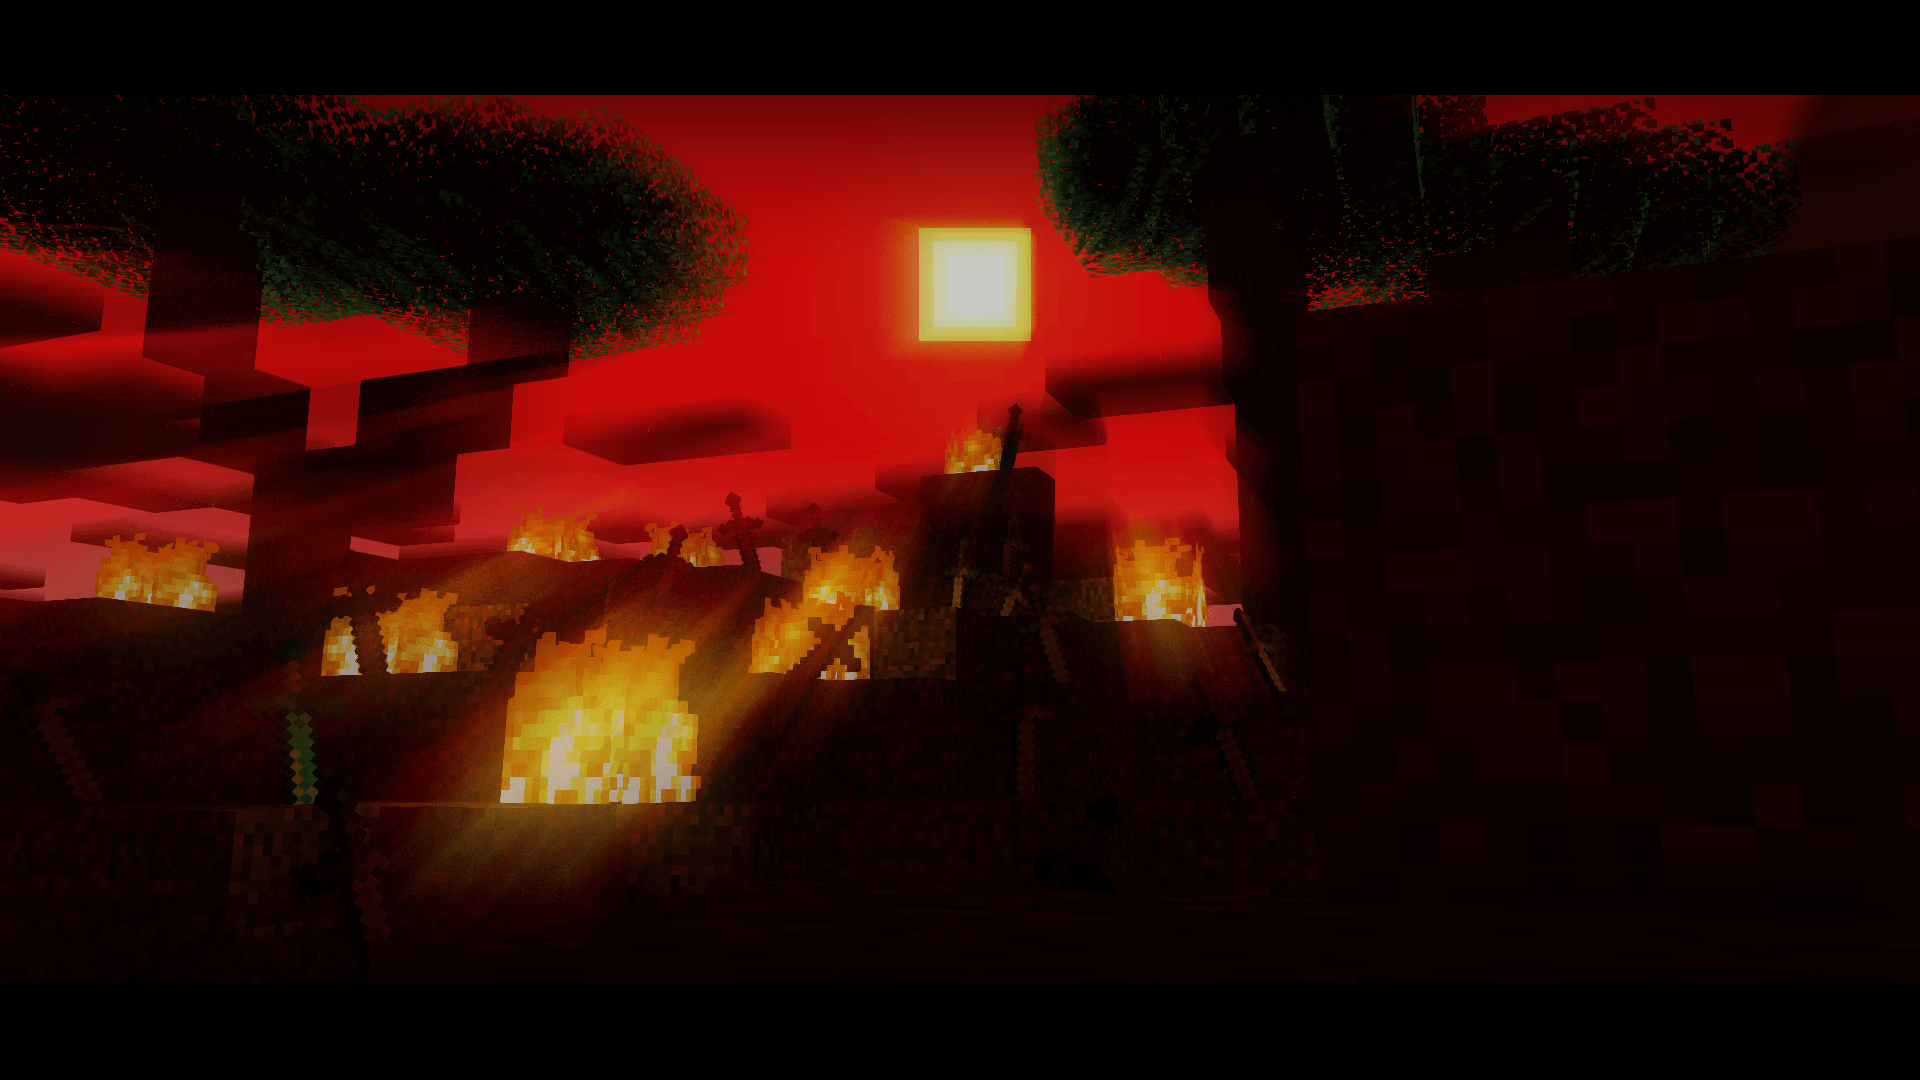 A screenshot of a Minecraft landscape, with a red sky and a village on fire. - Minecraft